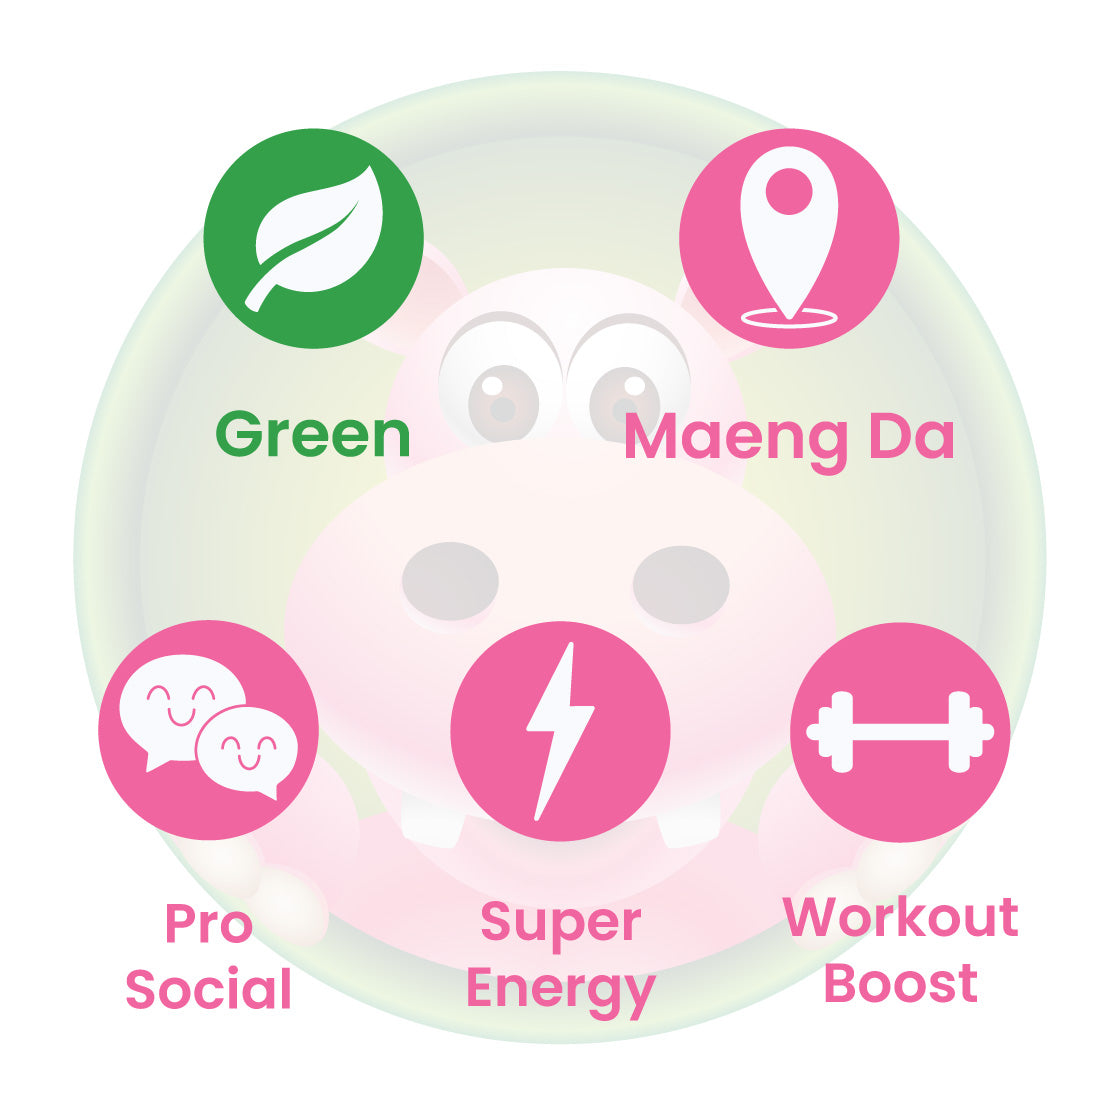 Infographic Details for Happy Hippo Green Vein Maeng Da Kratom Powder. Leaf color: Green Vein. Kratom Strain Origin: Maeng Da. Kratom Effects resonate with Social Energy, Super Energy, and Workout Boost.